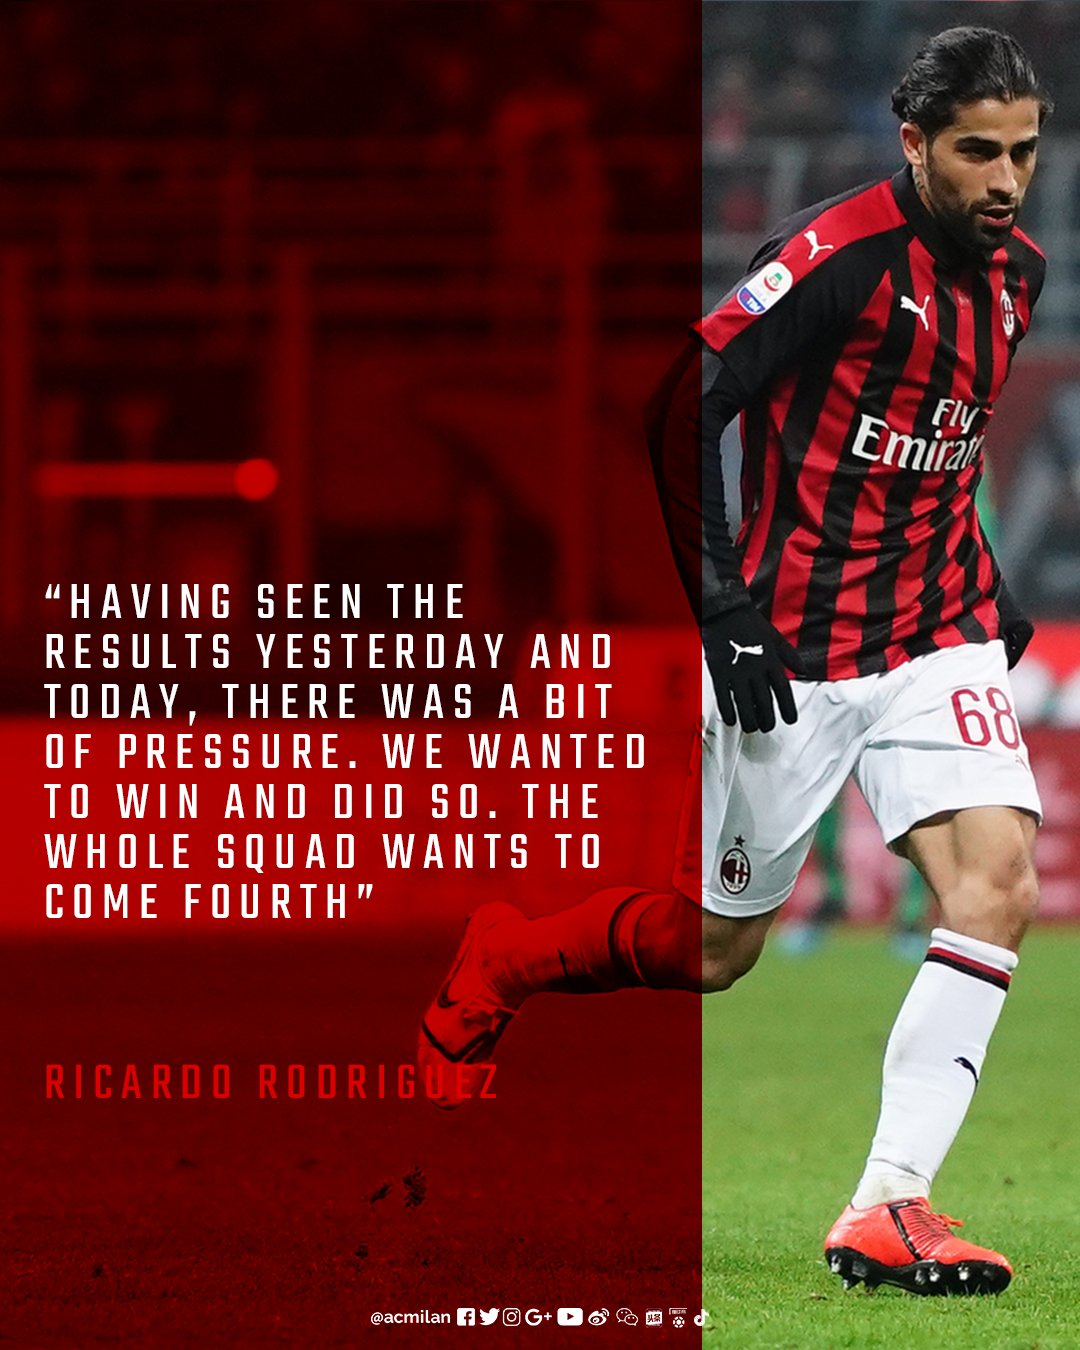 Milan Twitter: "🗣️ The boss and Ricardo Rodriguez commented on the game to @MilanTV after the final whistle of #MilanCagliari. their opinion on the game 👉🏼 https://t.co/fH5FTLK8Bv https://t.co/ovnFPxdmoI" /